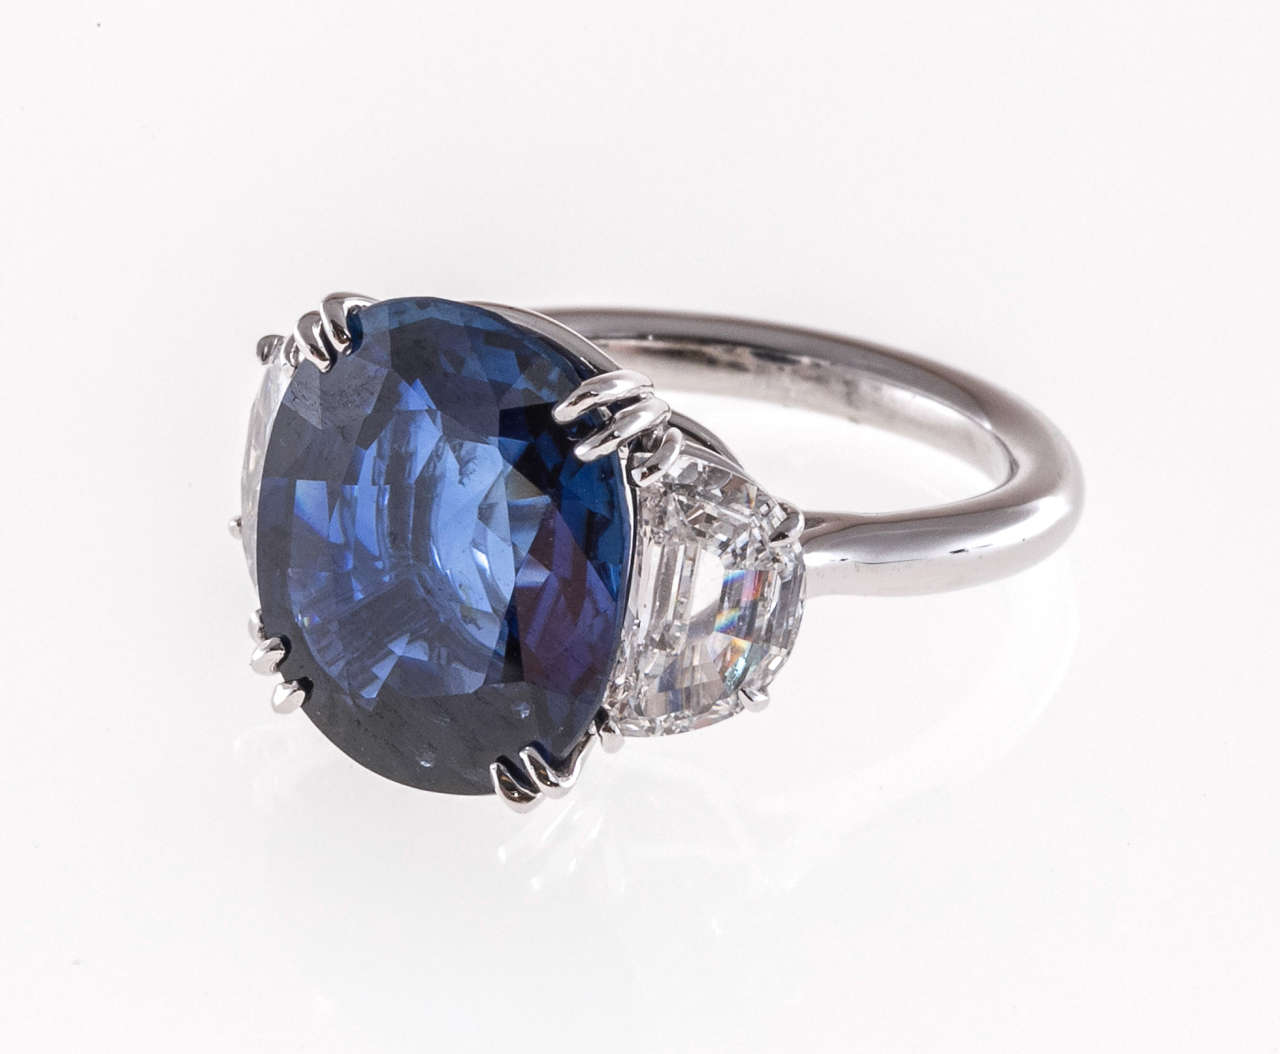 Top gem Sapphire ring circa 1940-1950. First the center stone, 7.94cts of top gem cornflower blue extra fine color. Not cut excessively deep. In fact the top is the size of most 10ct to 12ct Sapphires with no loss of brilliance. GIA certified